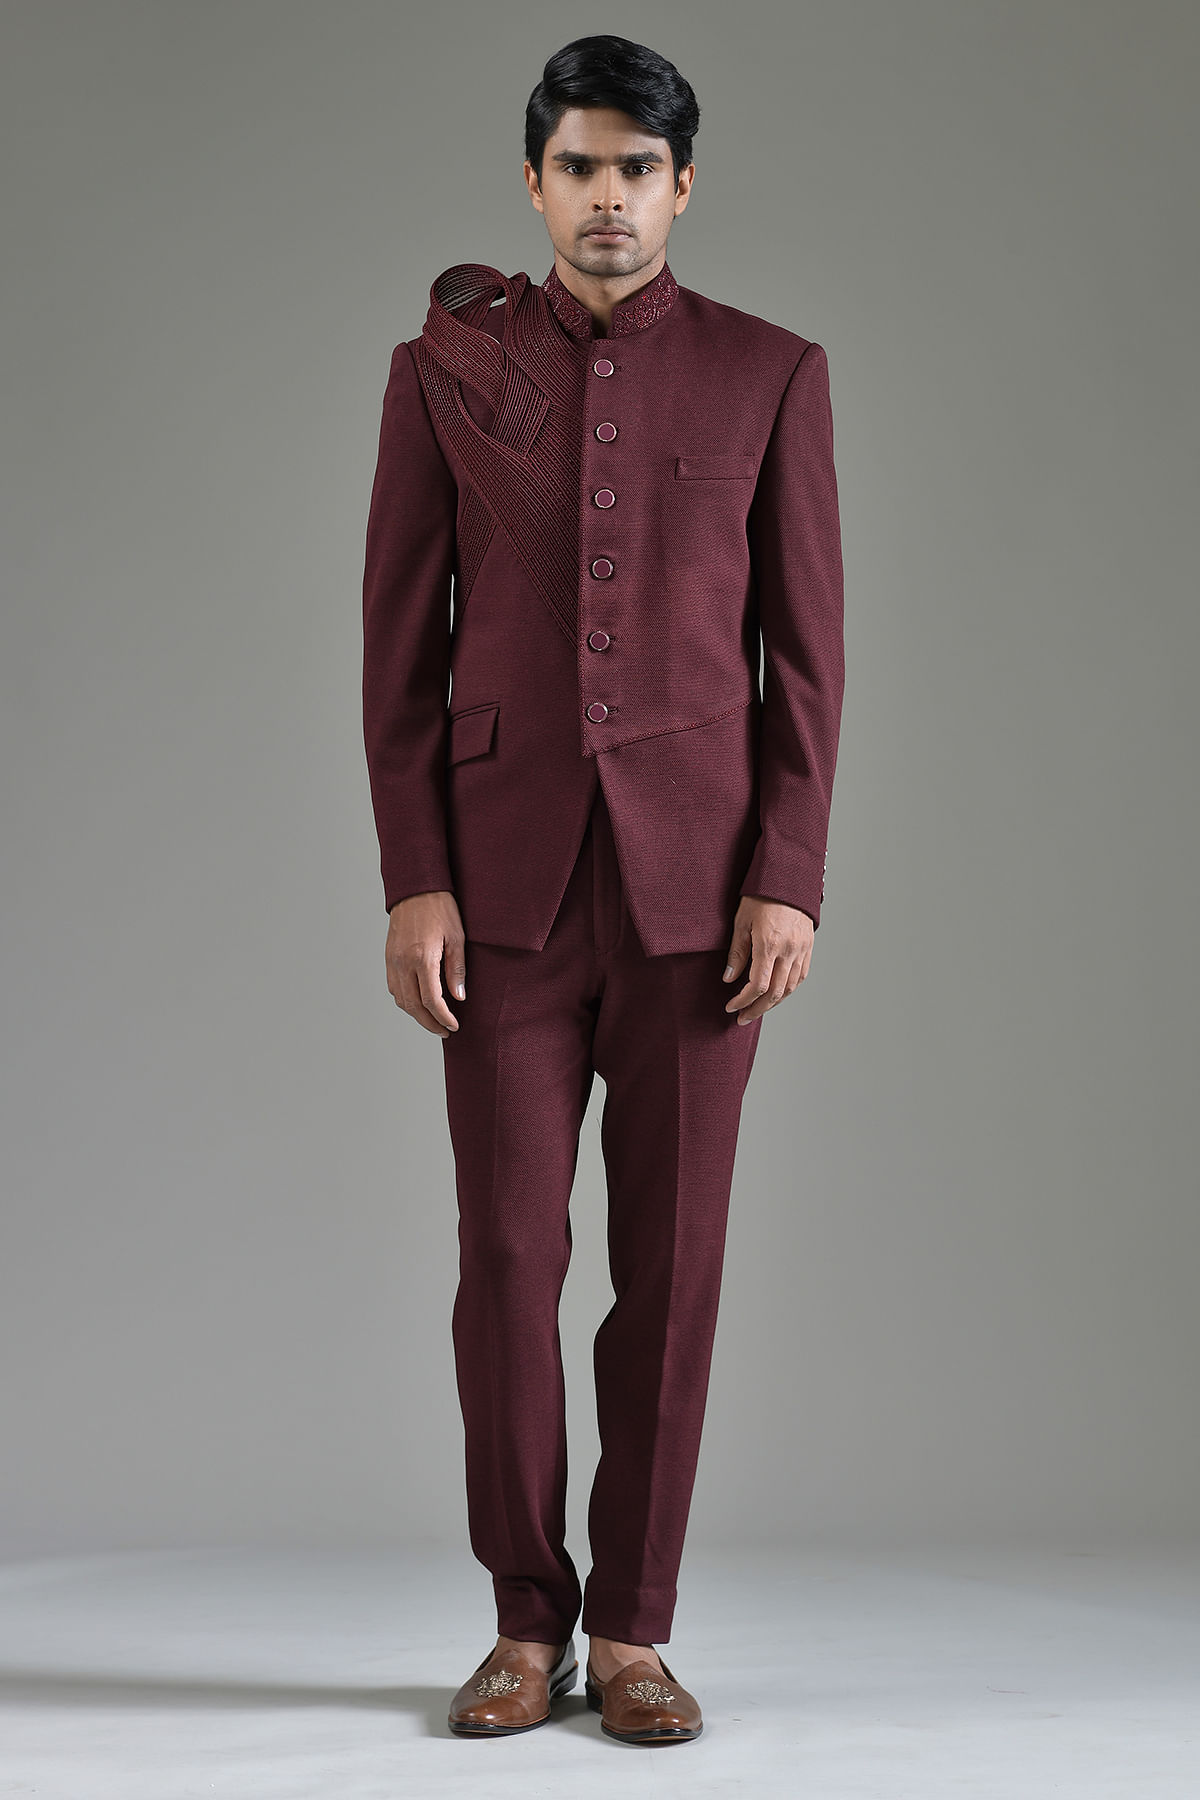 Buy Designer Handmade Wine Color Jodhpuri Bandgala Suit for Men for Wedding  Party Reception and Events and Festive Online in India - Etsy